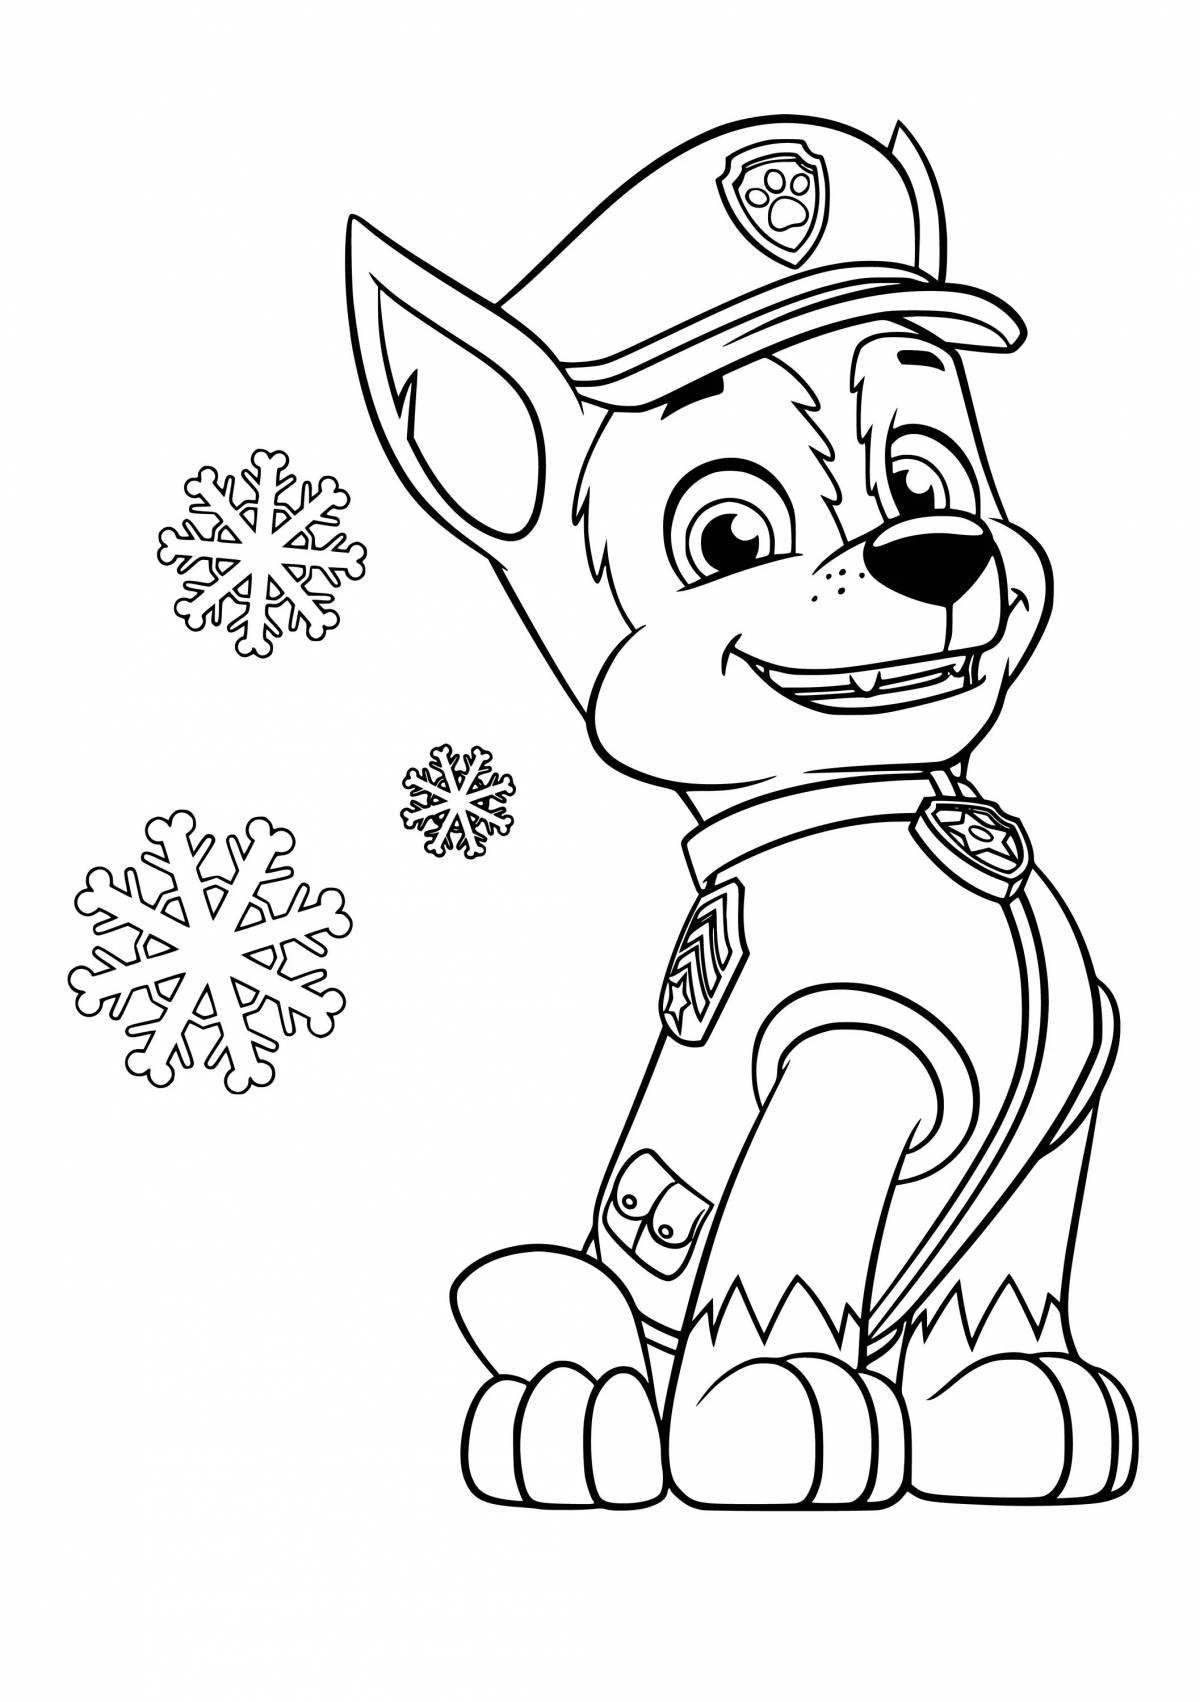 Coloring page glowing mega racer